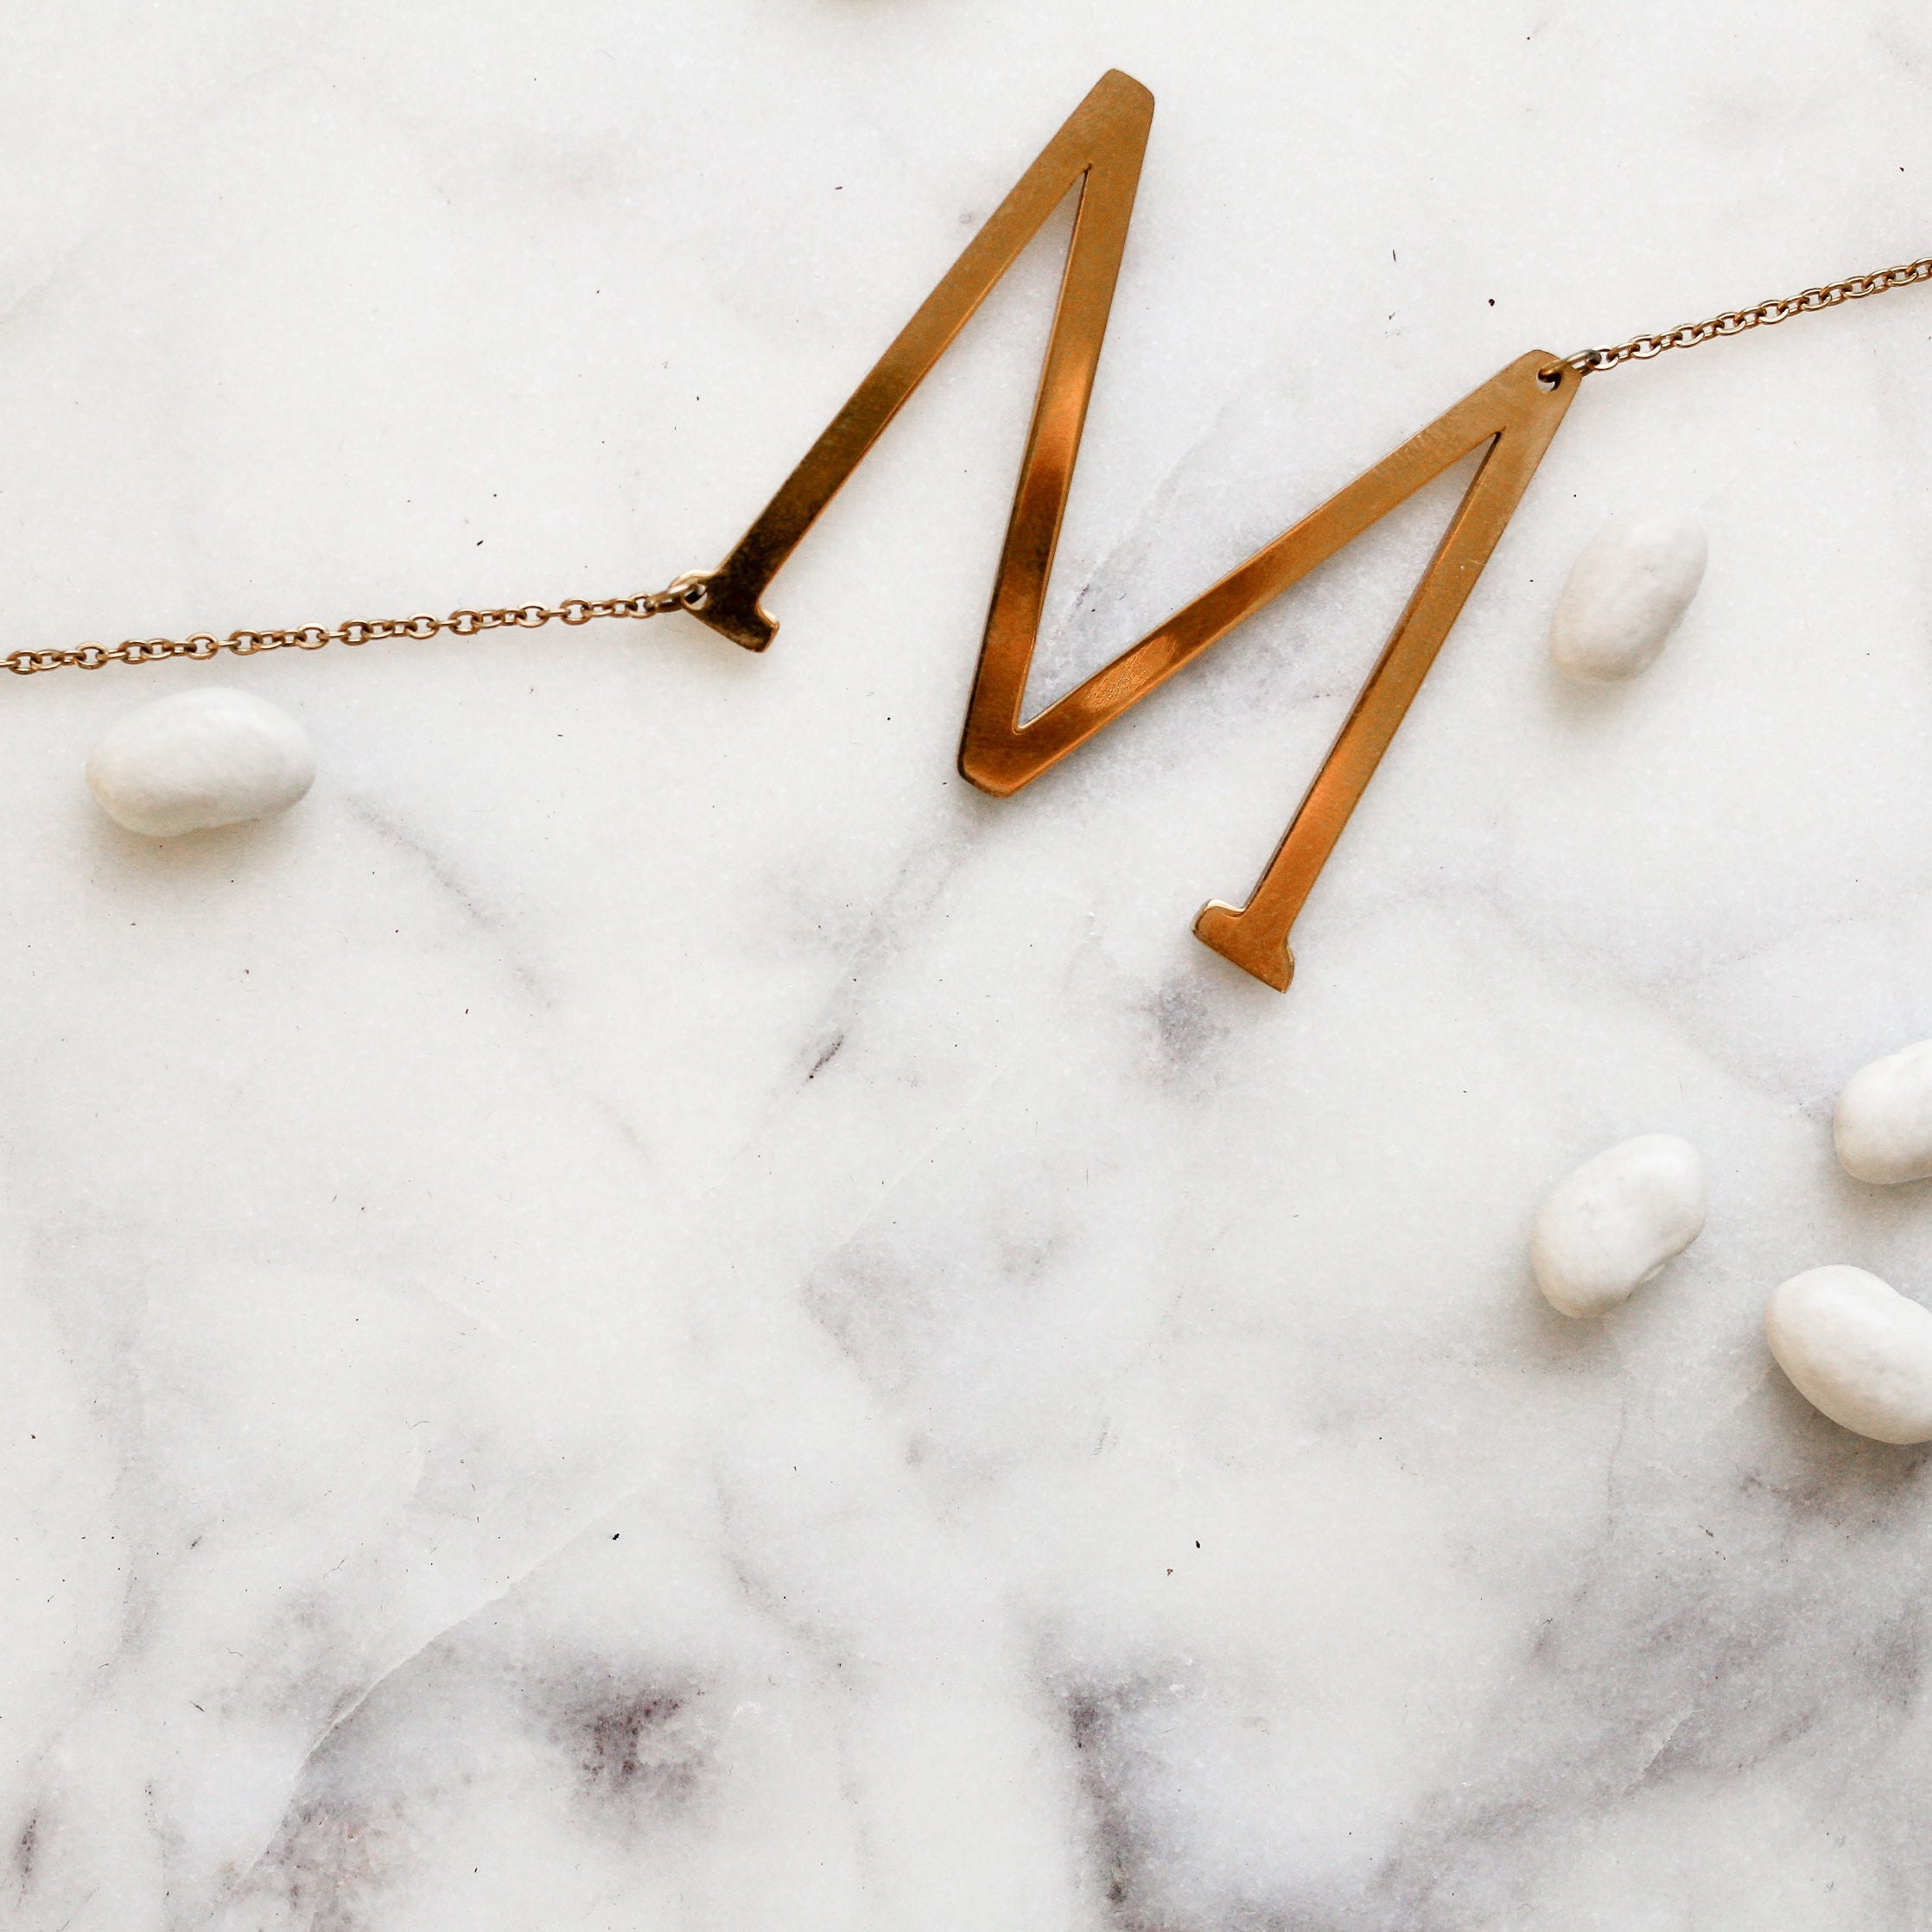 Large Initial Letter Necklace